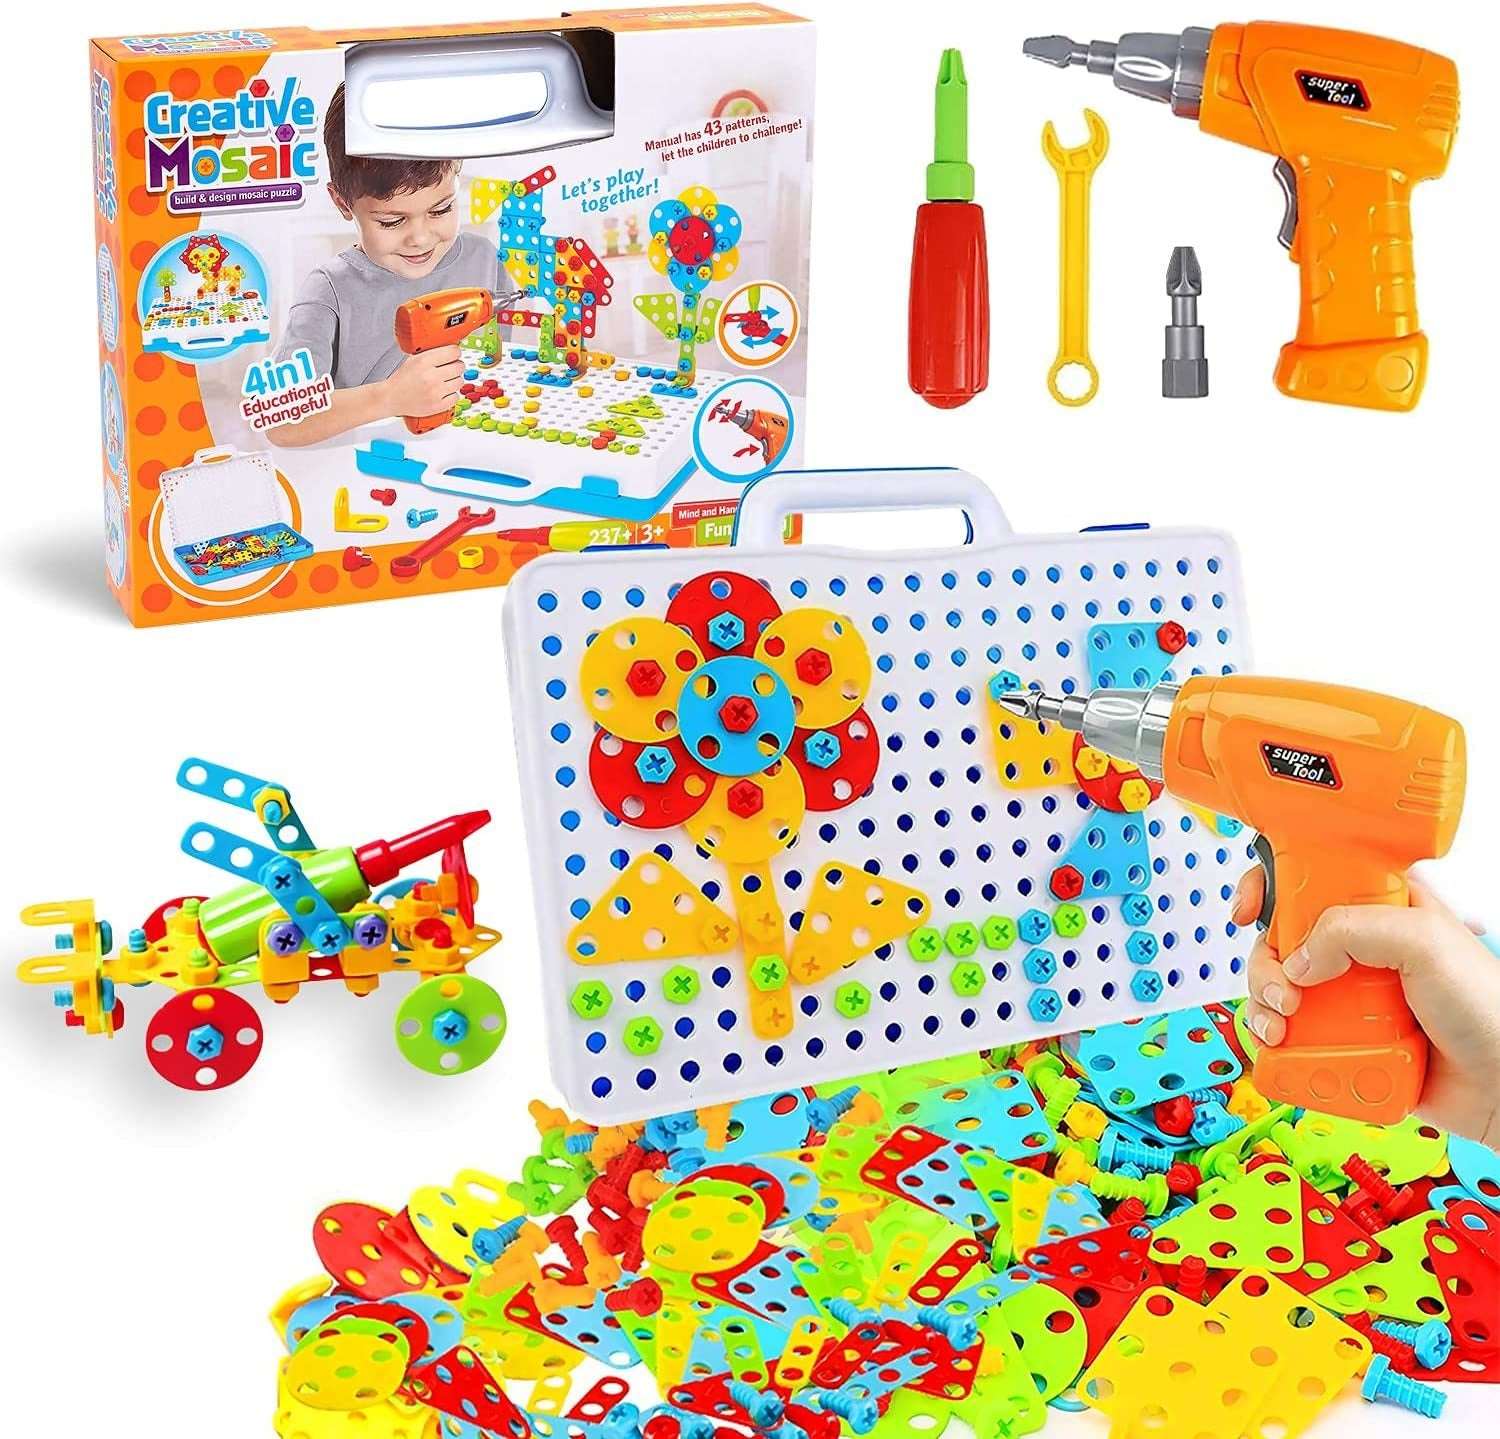 237 Pieces Creative Toy Drill Puzzle Set;  STEM Learning Educational Toys;  3D Construction Engineering Building Blocks for Boys and Girls Ages 3 4 5 6 7 8 9 10 Year Old